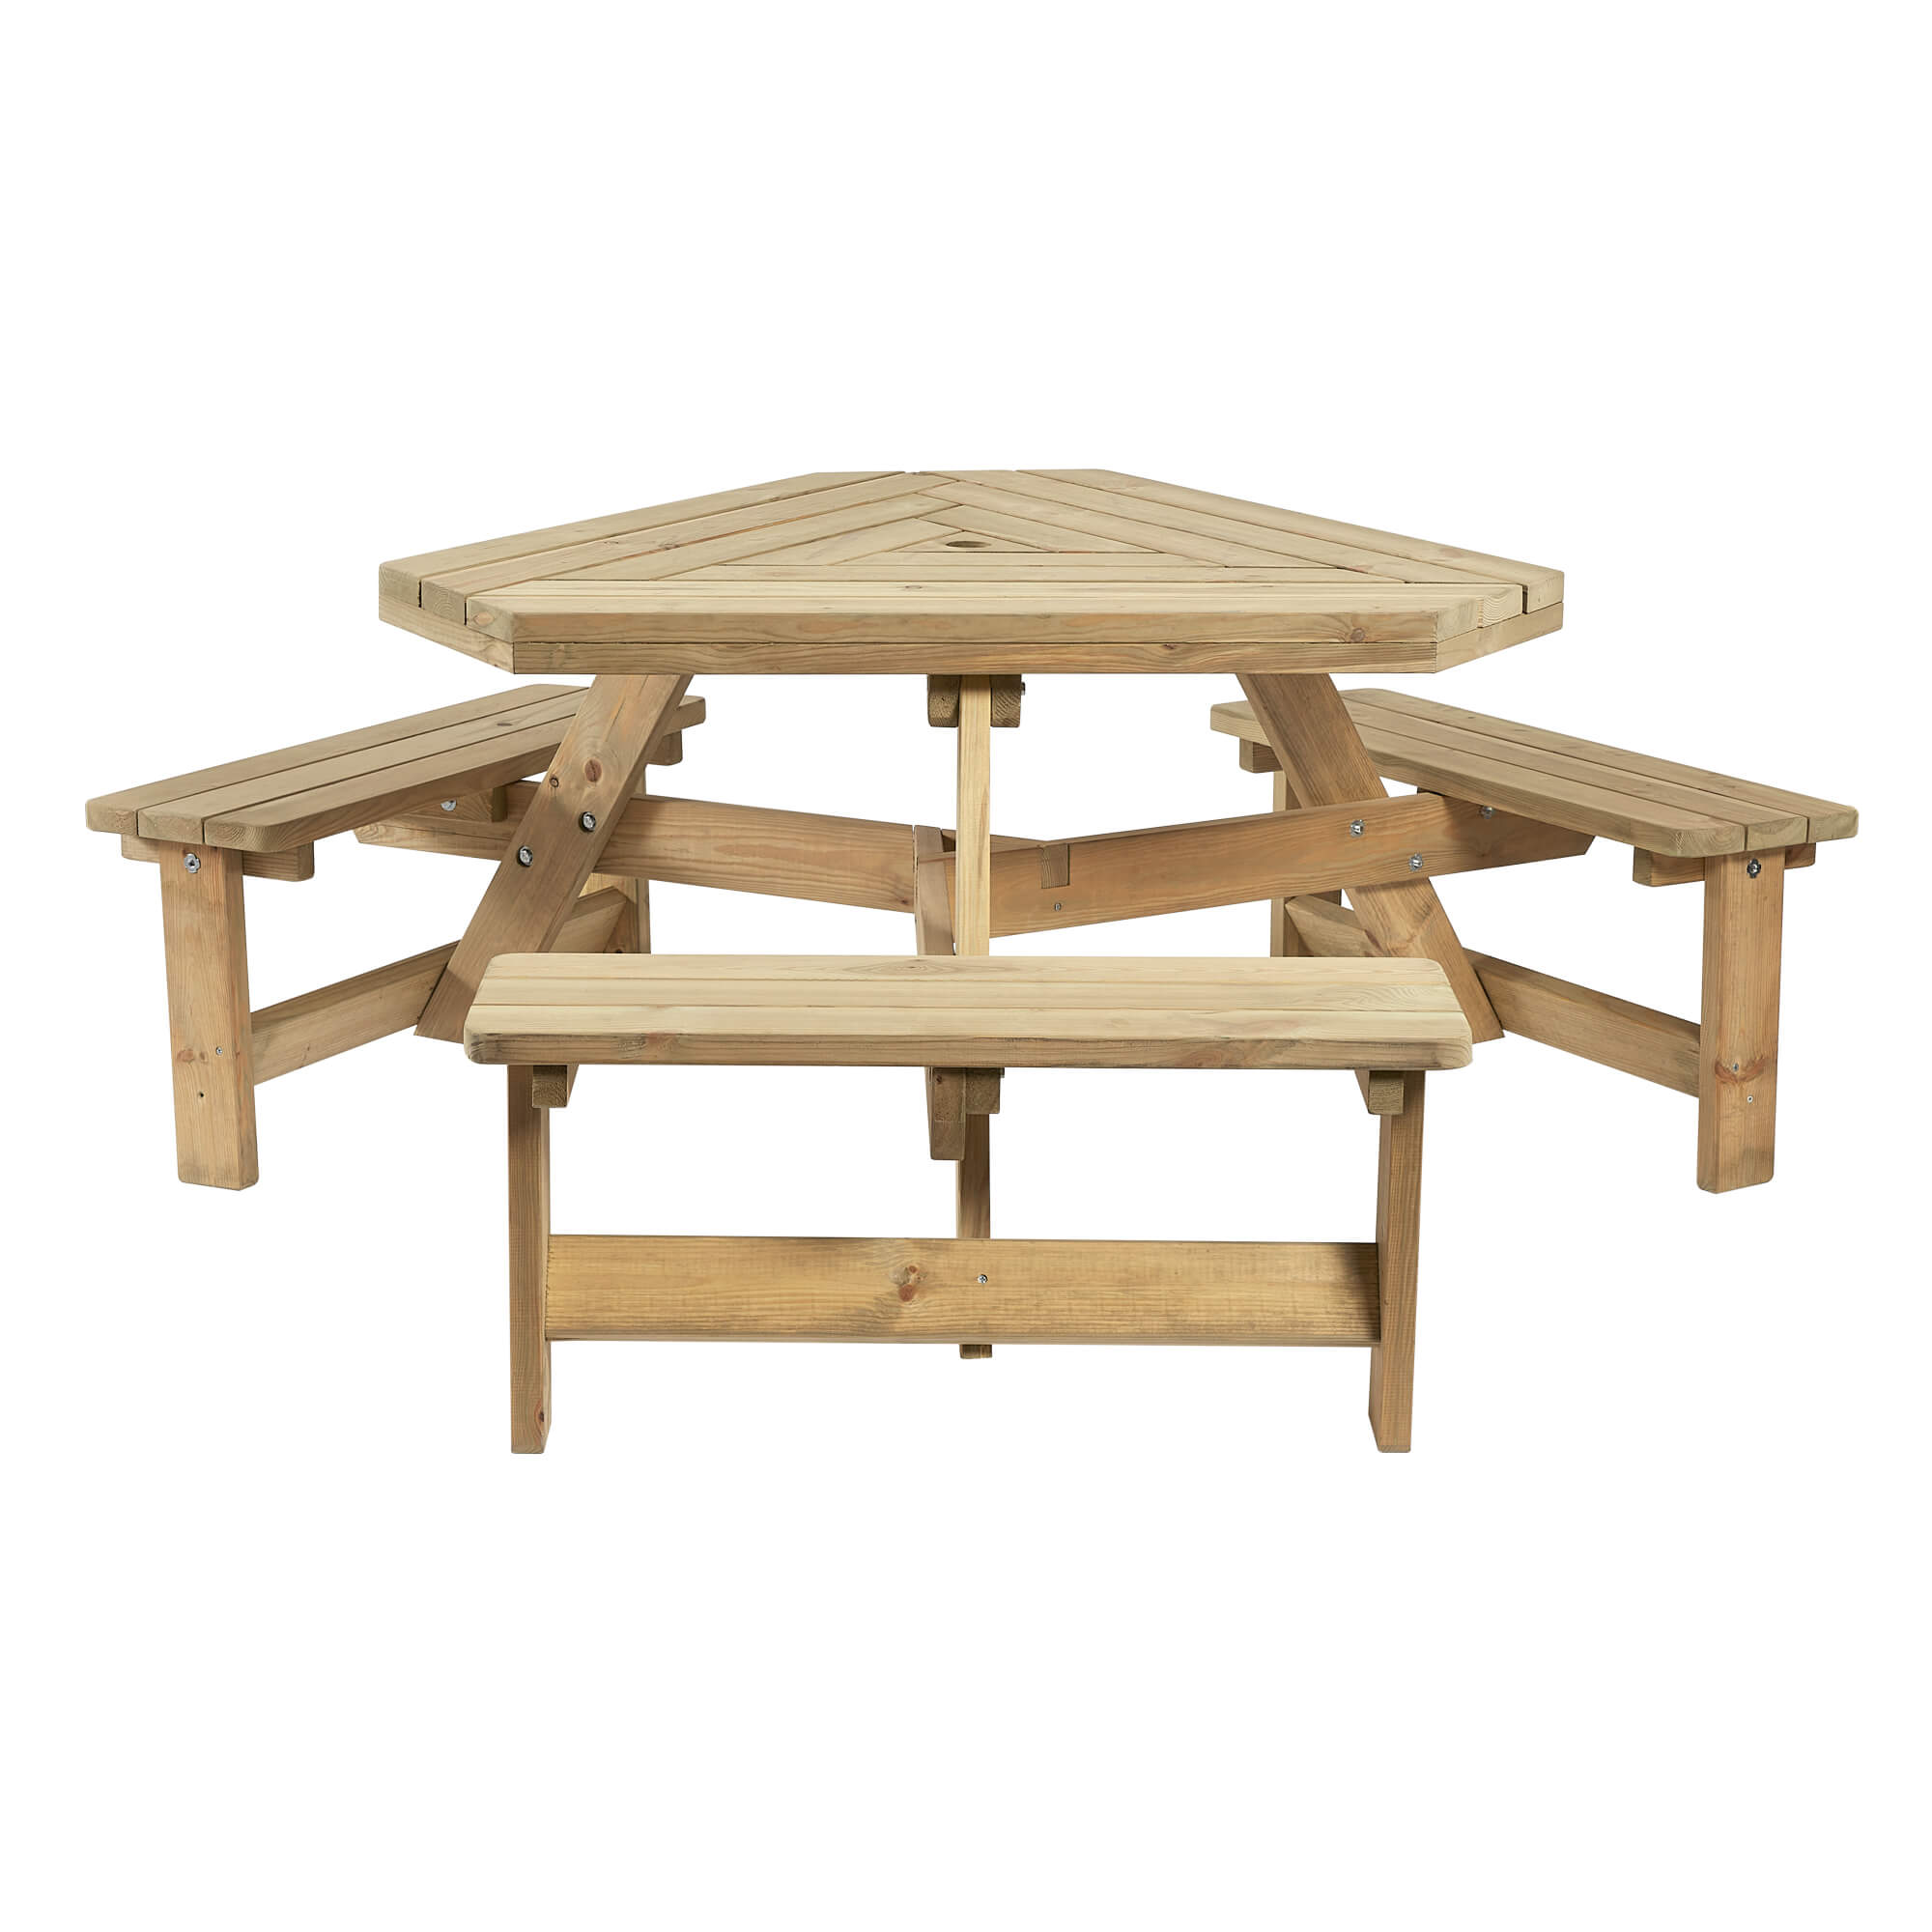 OUTDOOR TRANGLE 6 SEATER WOODEN BENCH